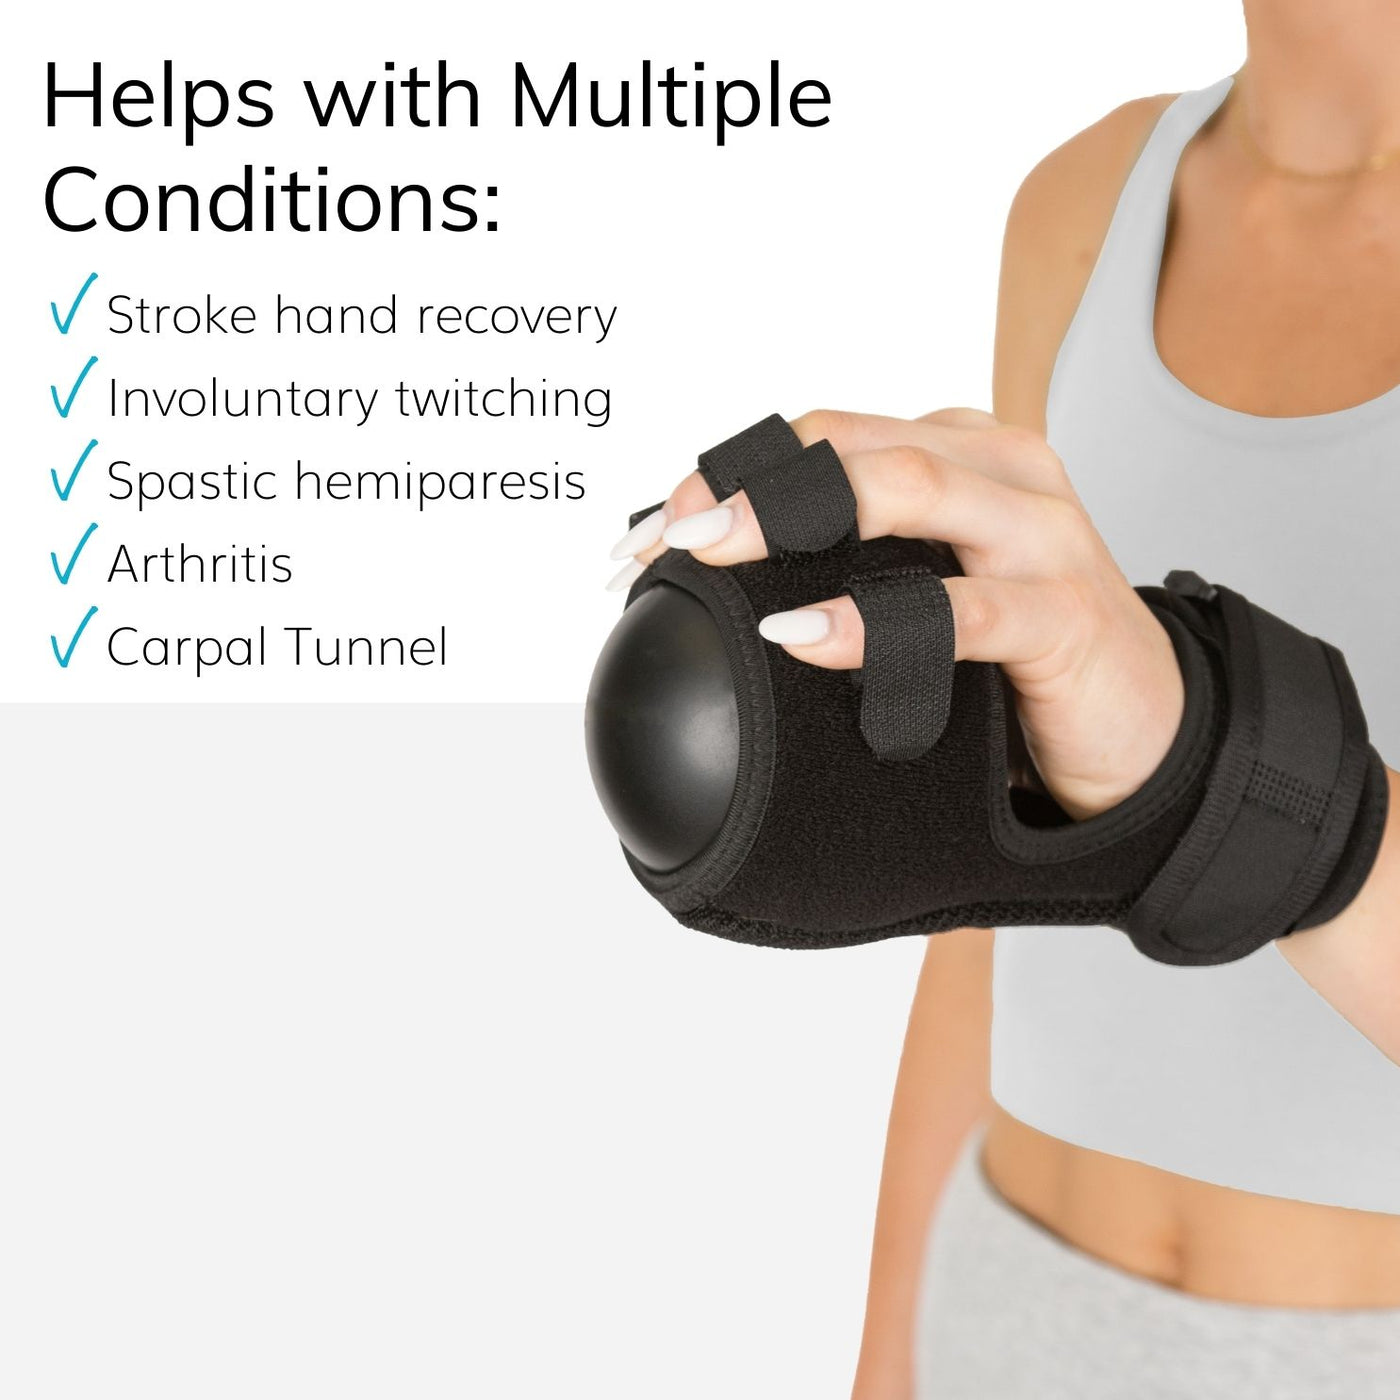 Our contracture hand splint also helps with stroke recovery, involuntary twitching, spastic hemiparesis, and arthritis